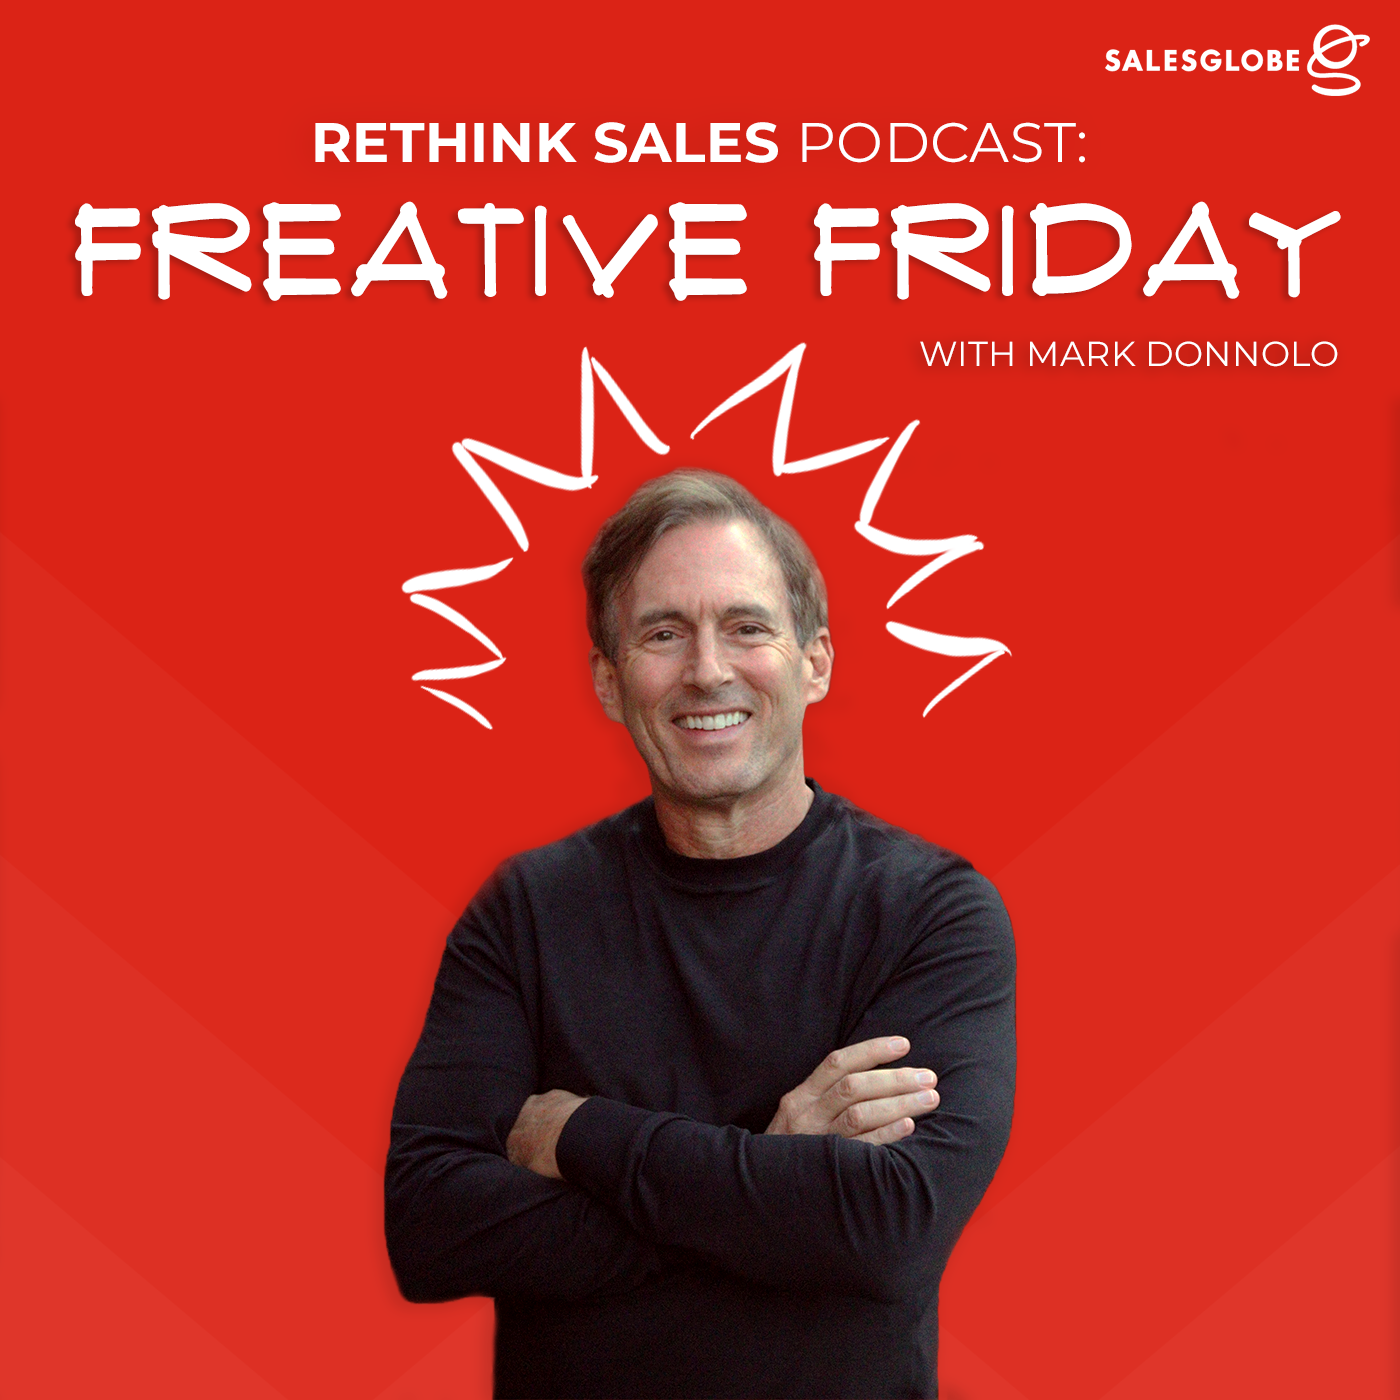 90: Freative Friday - The Art of Questioning